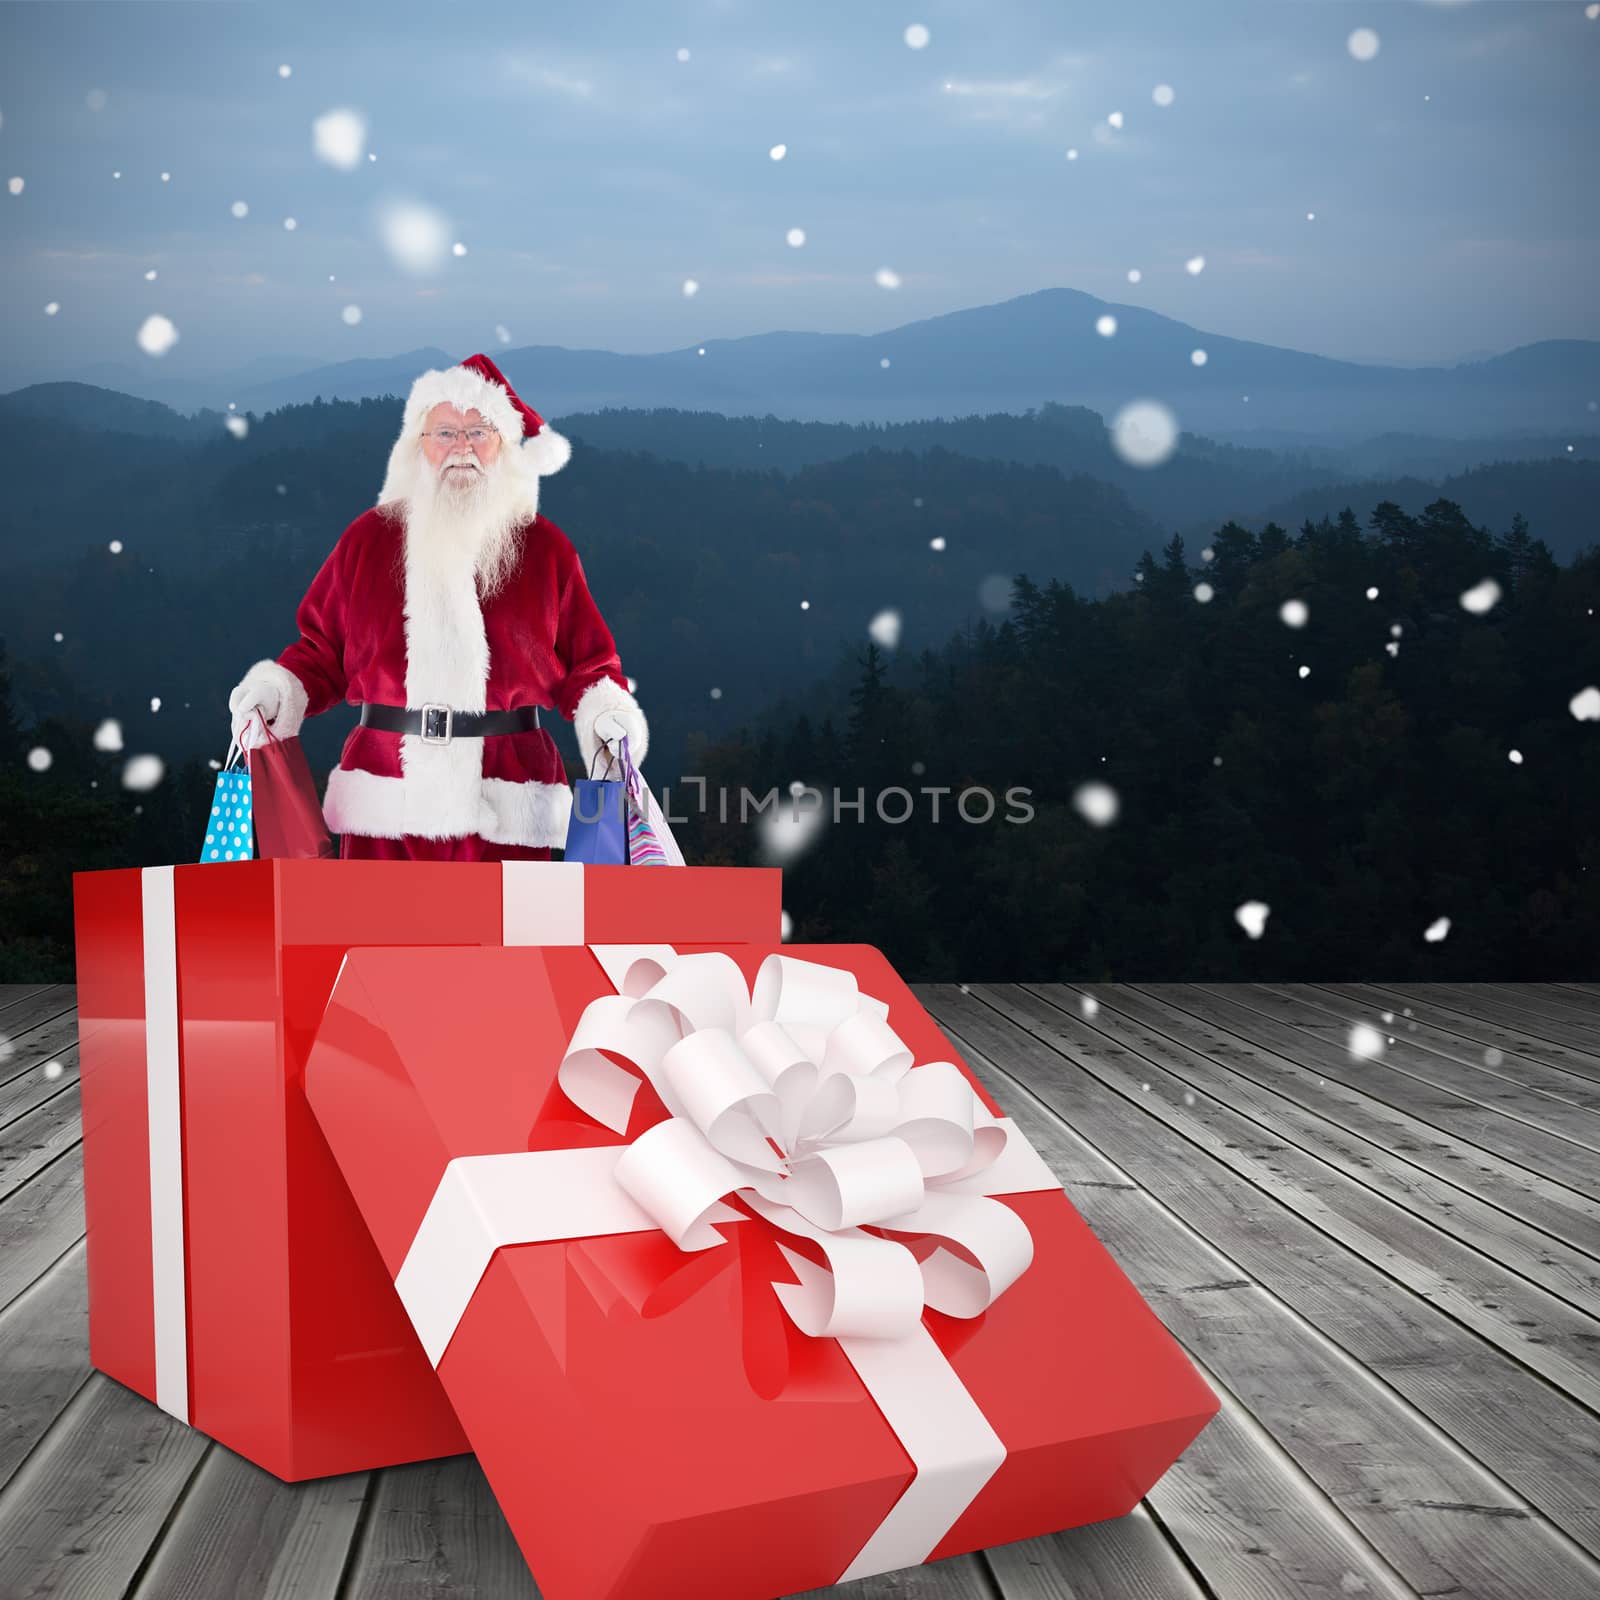 Santa standing in large gift against wooden planks against mountains